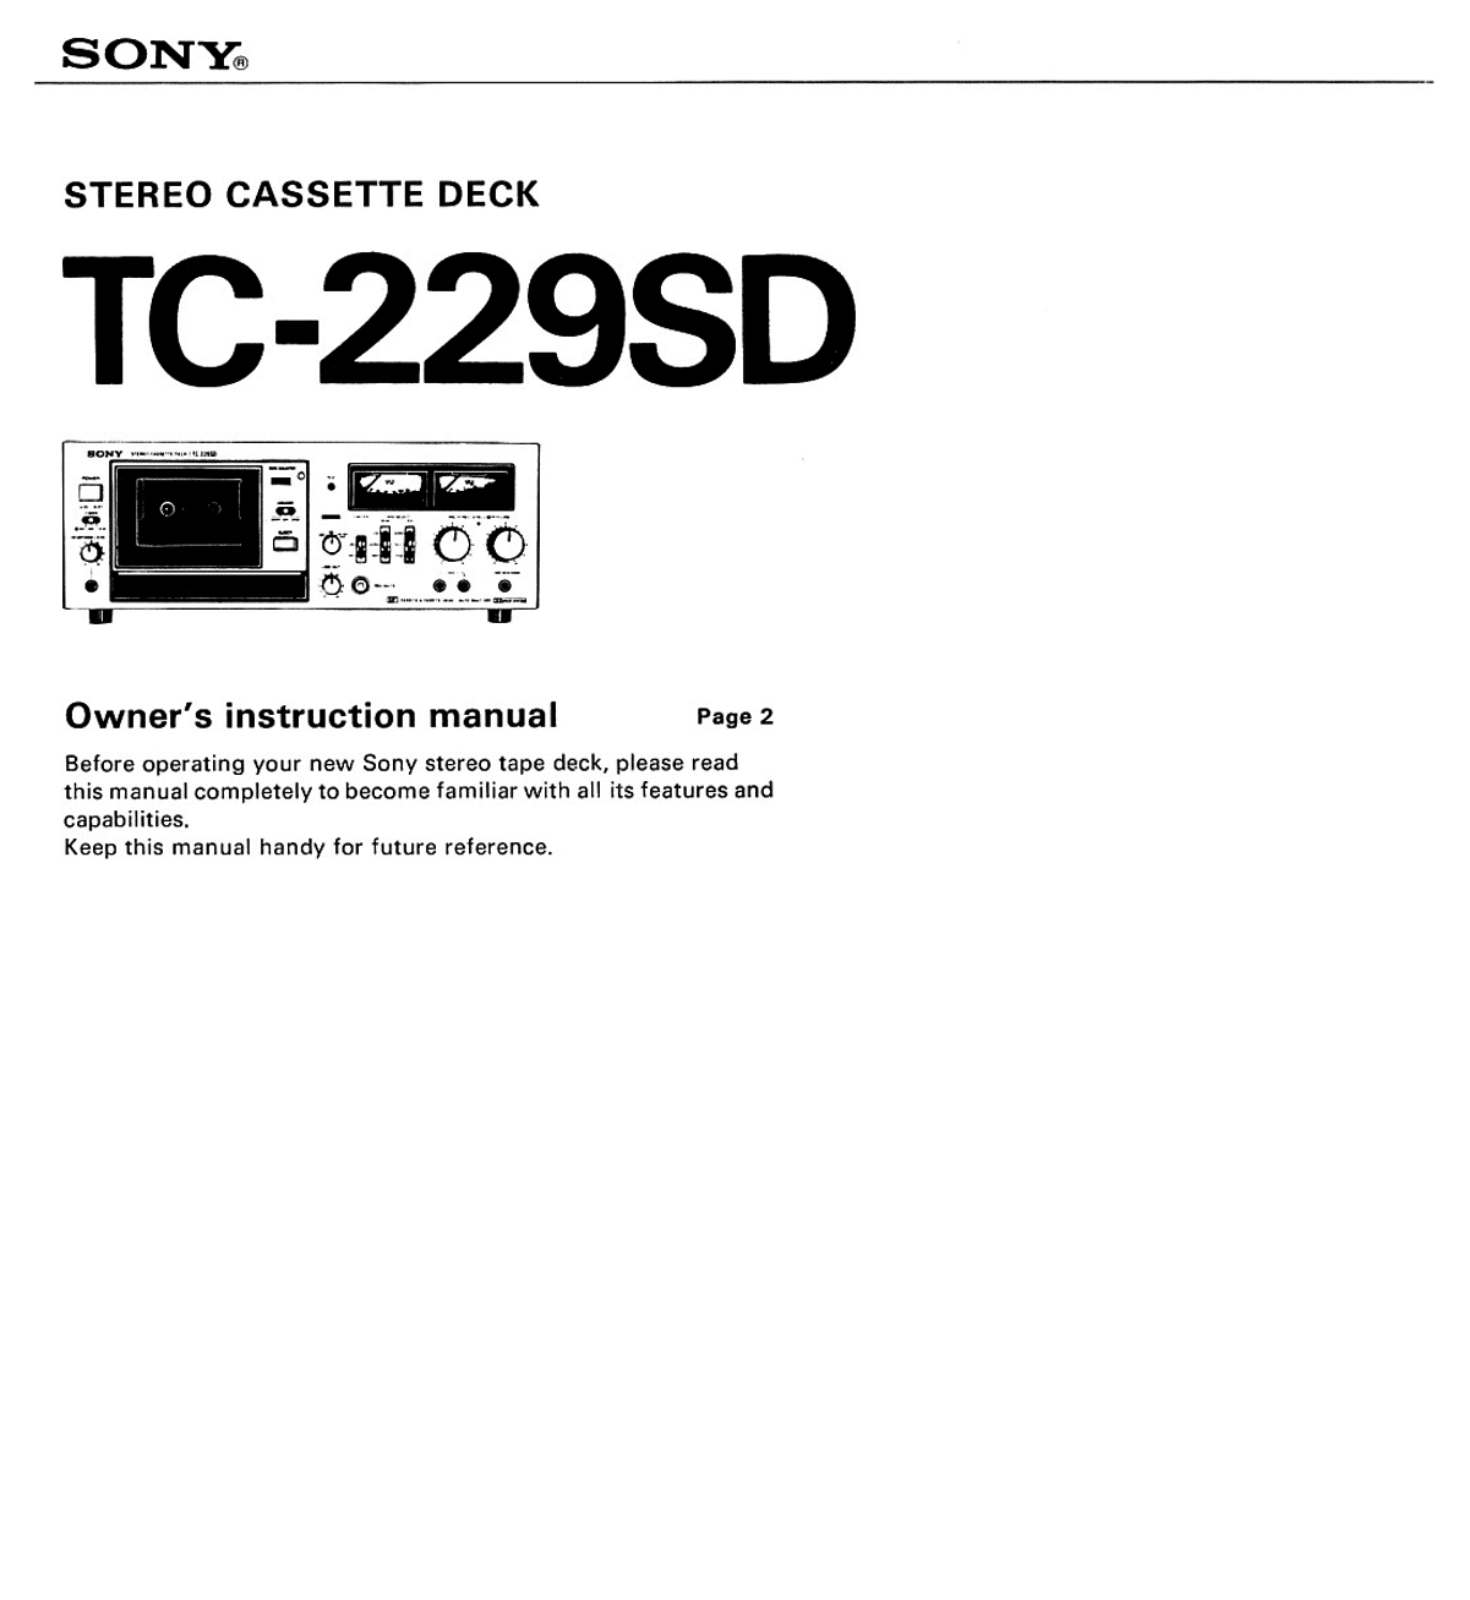 Sony TC-229-SD Owners manual